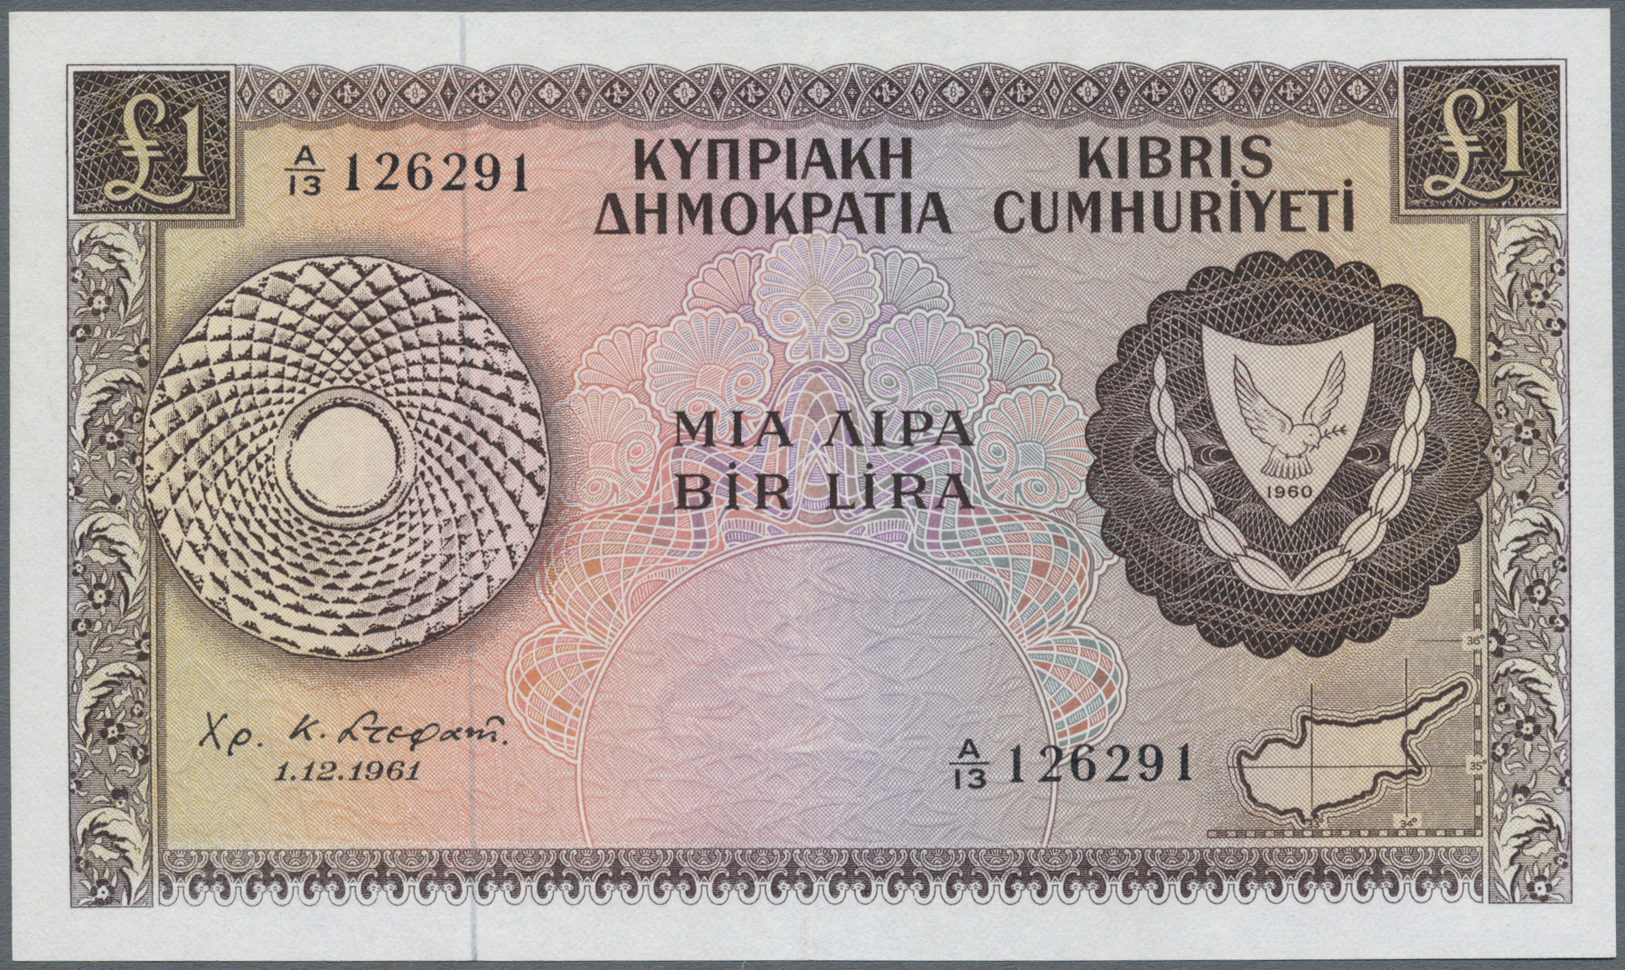 00618 Cyprus / Zypern: 1 Pound 1961 P. 39a, Light Center Fold Otherwise Perfect, Condition: XF. - Cyprus